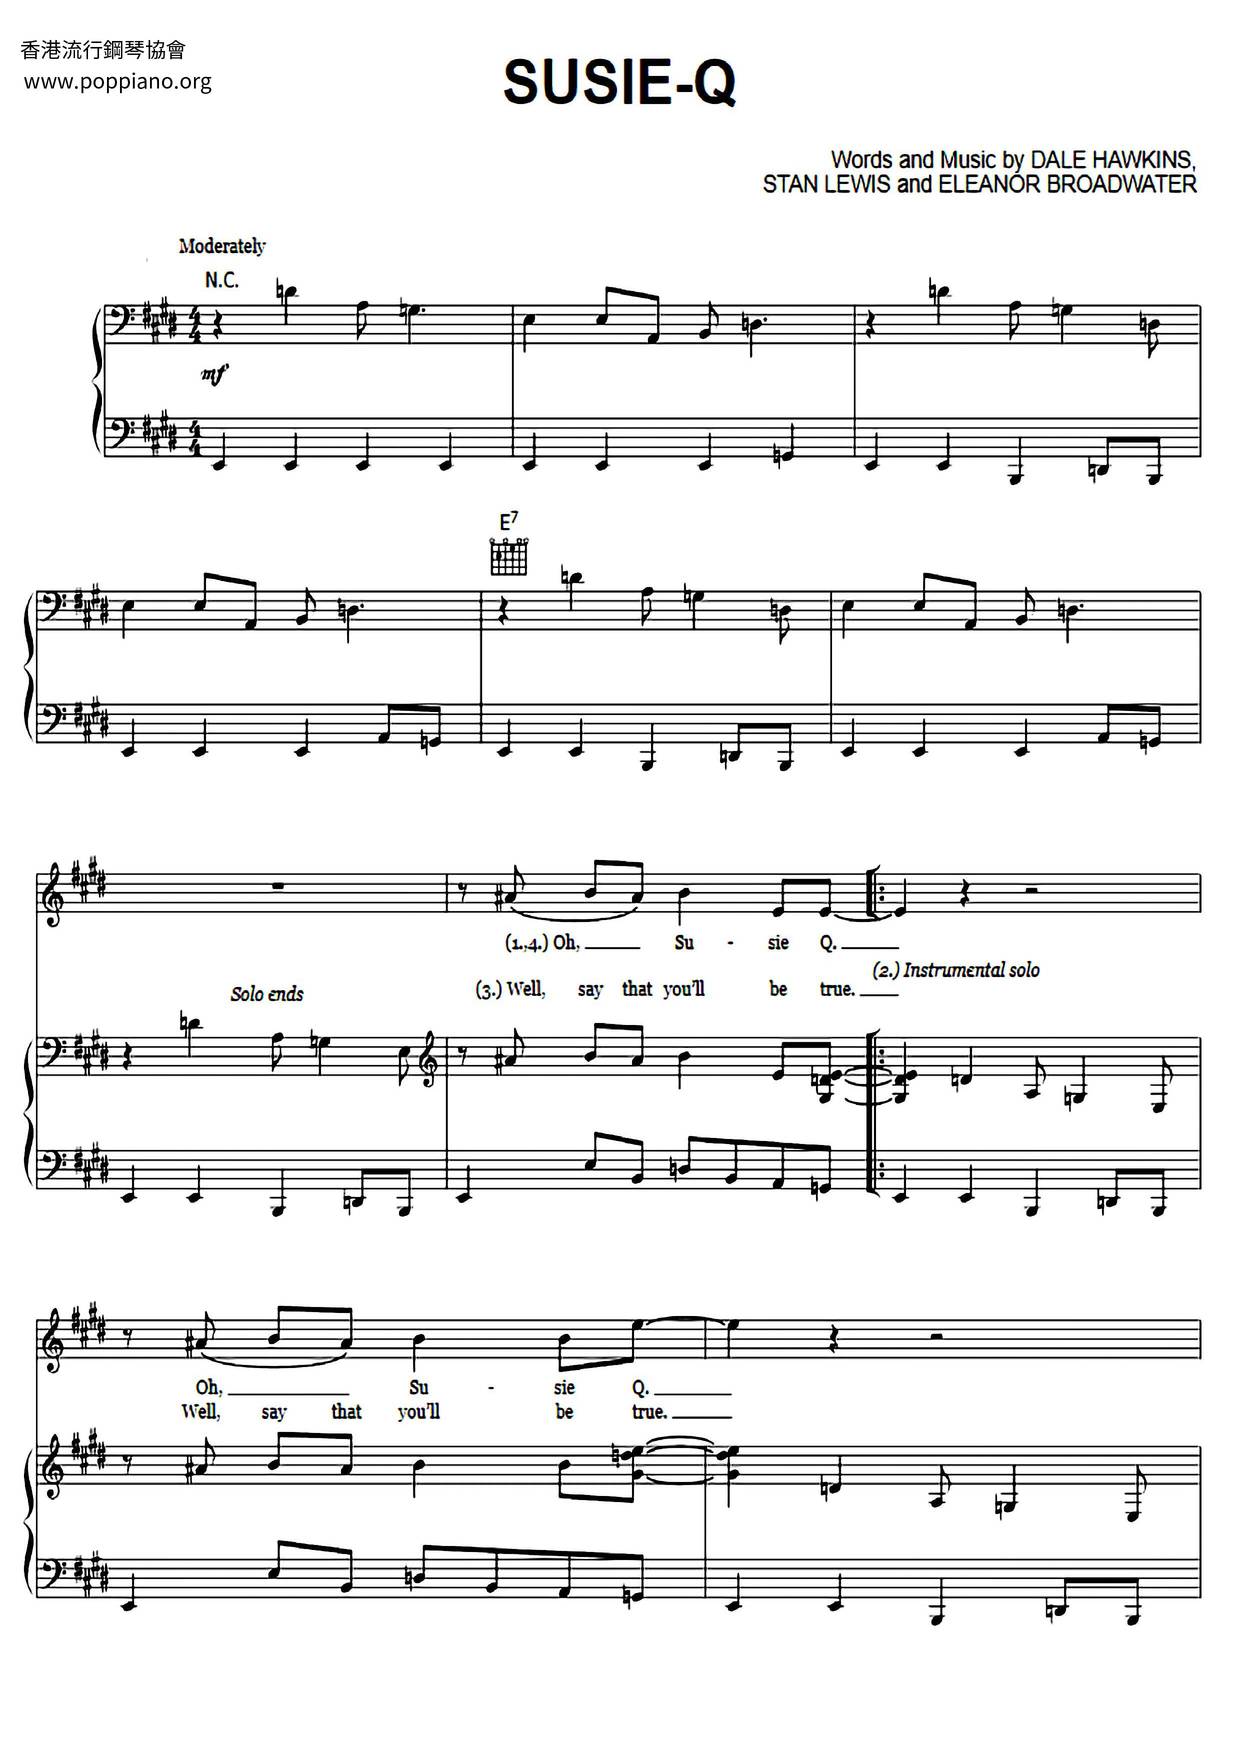 ☆ Creedence Clearwater Revival-Susie Q Sheet Music pdf, - Free